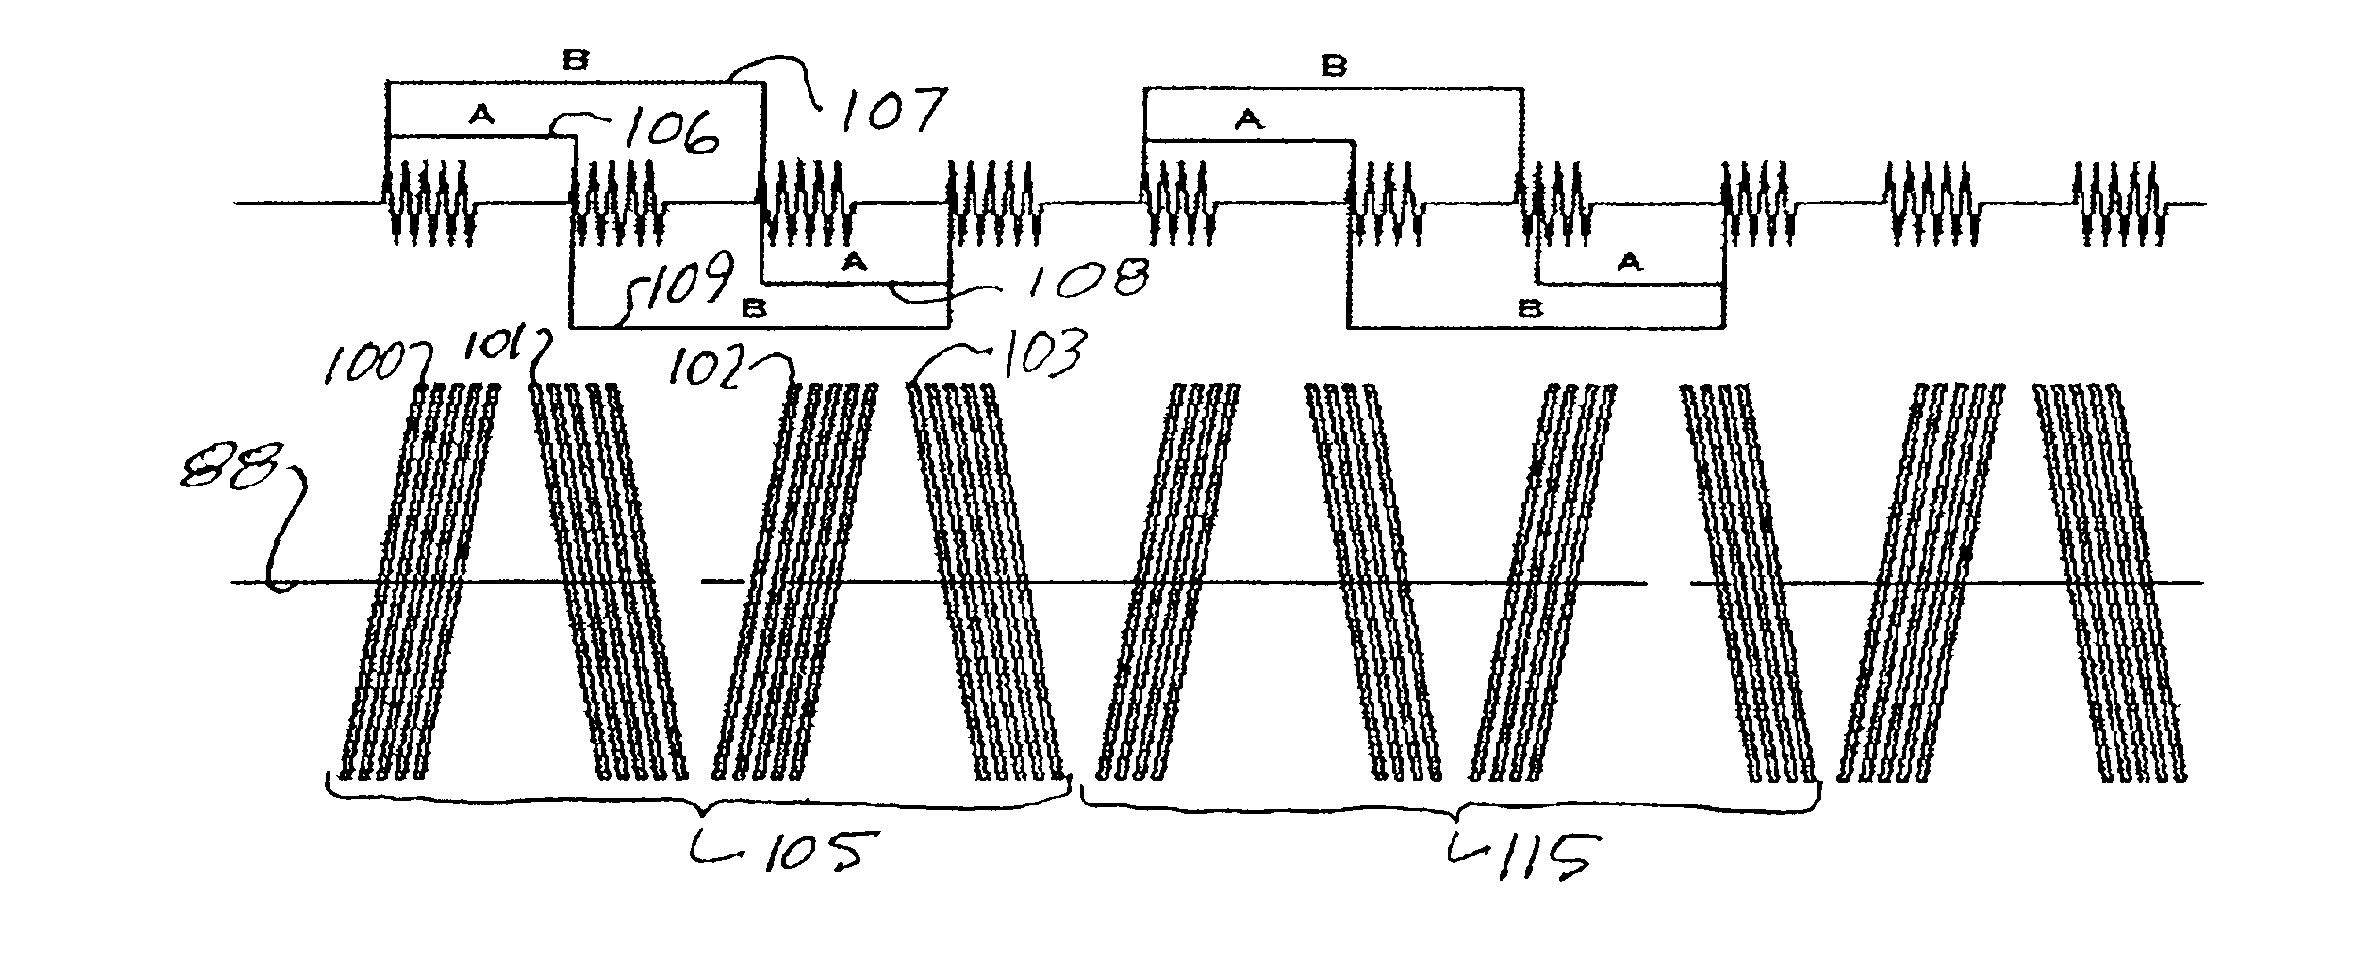 Timing based servo with fixed distances between transitions